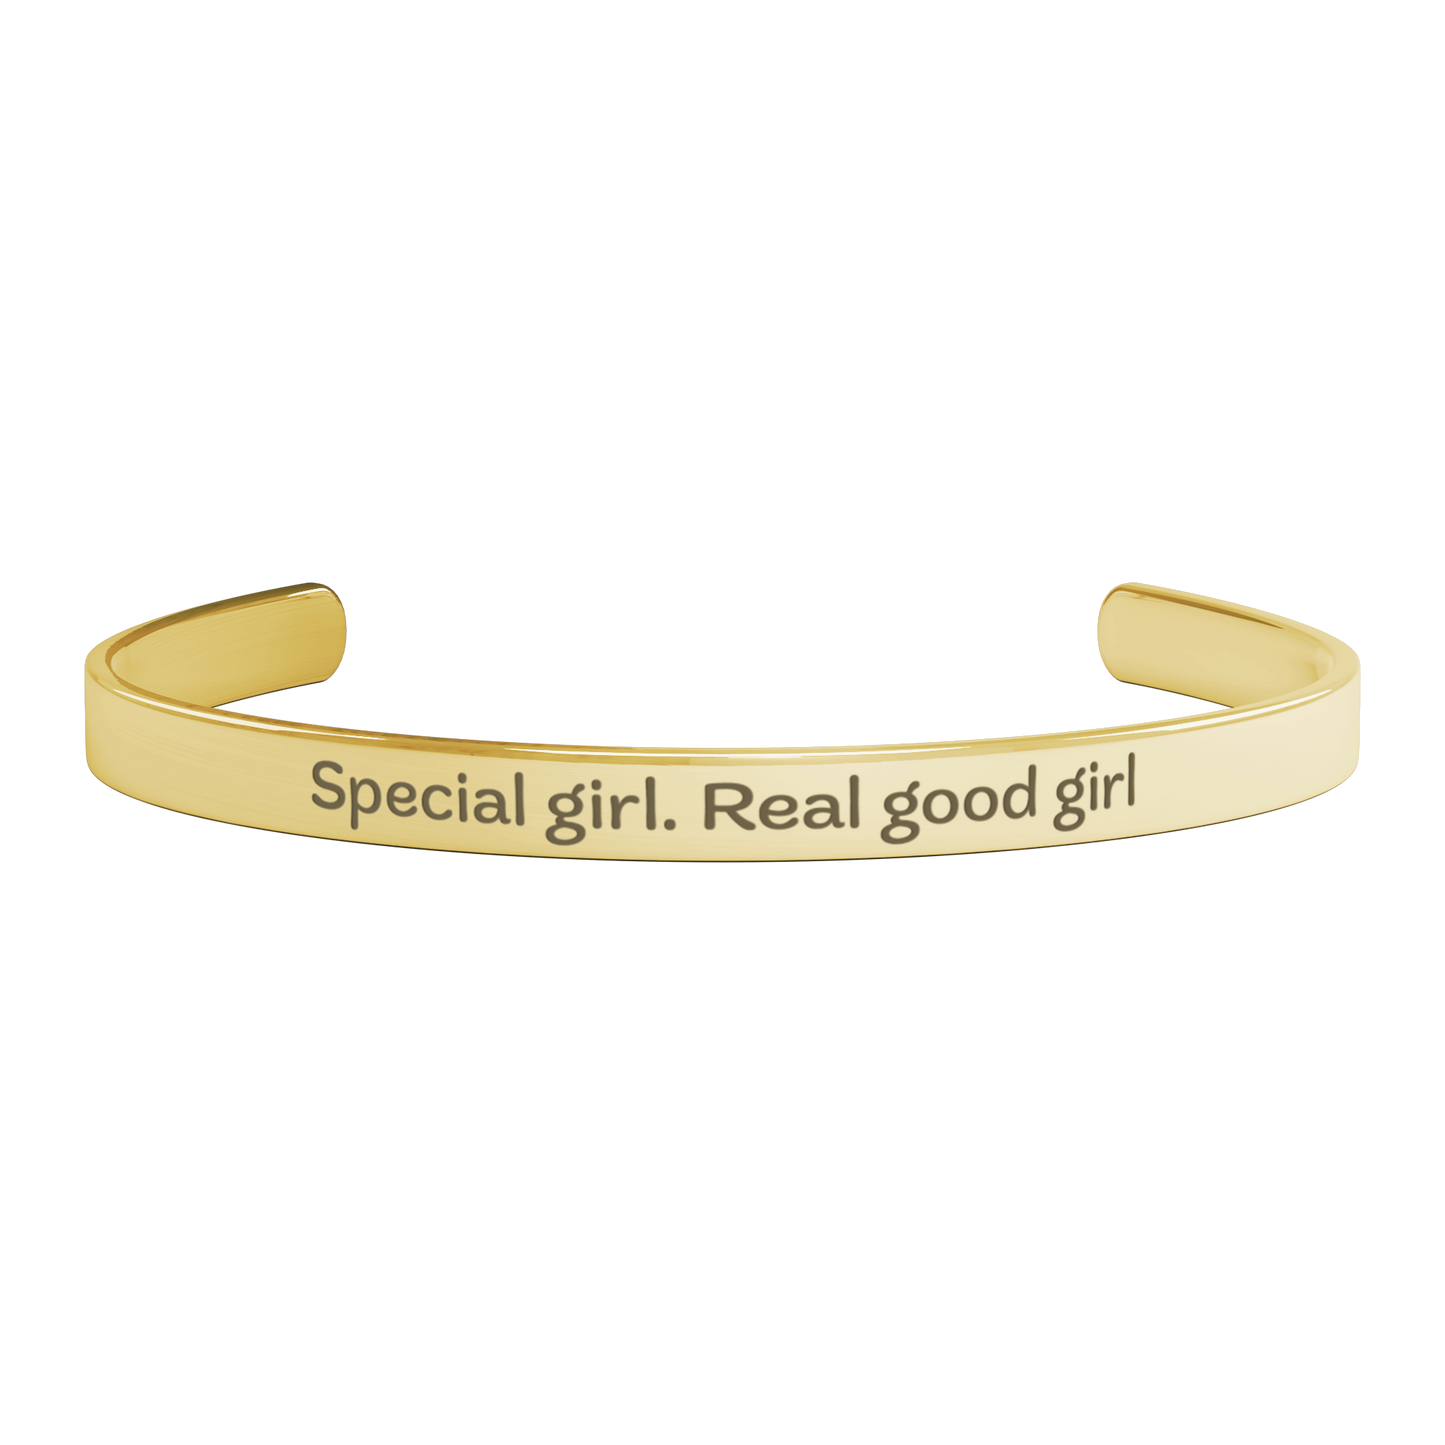 Special girl. Real good girl